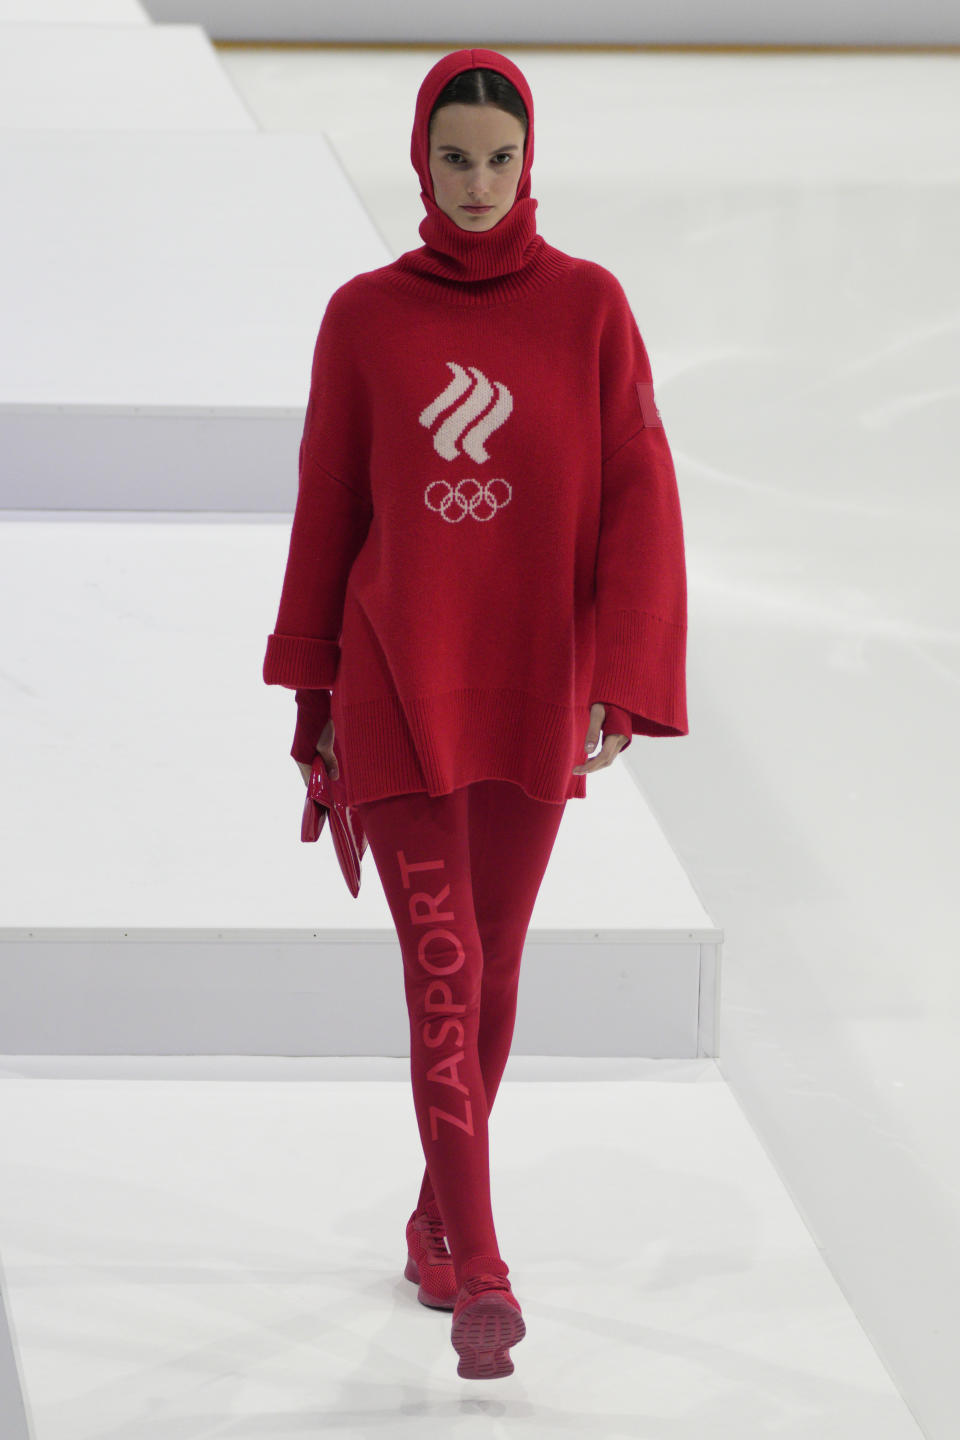 A model displays the Olympic uniforms for Russian athletes in Moscow, Russia, Friday, Dec. 10, 2021. Russia presents its Olympic kit for the Beijing Winter Olympics 2022, which shouldn't depict any symbols of the country. Russian athletes will compete at the Tokyo Olympics as neutral after the Court of Arbitration for Sport last December banned Russia from using its name, flag and anthem at any world championships because of state-backed doping. (AP Photo/Pavel Golovkin)